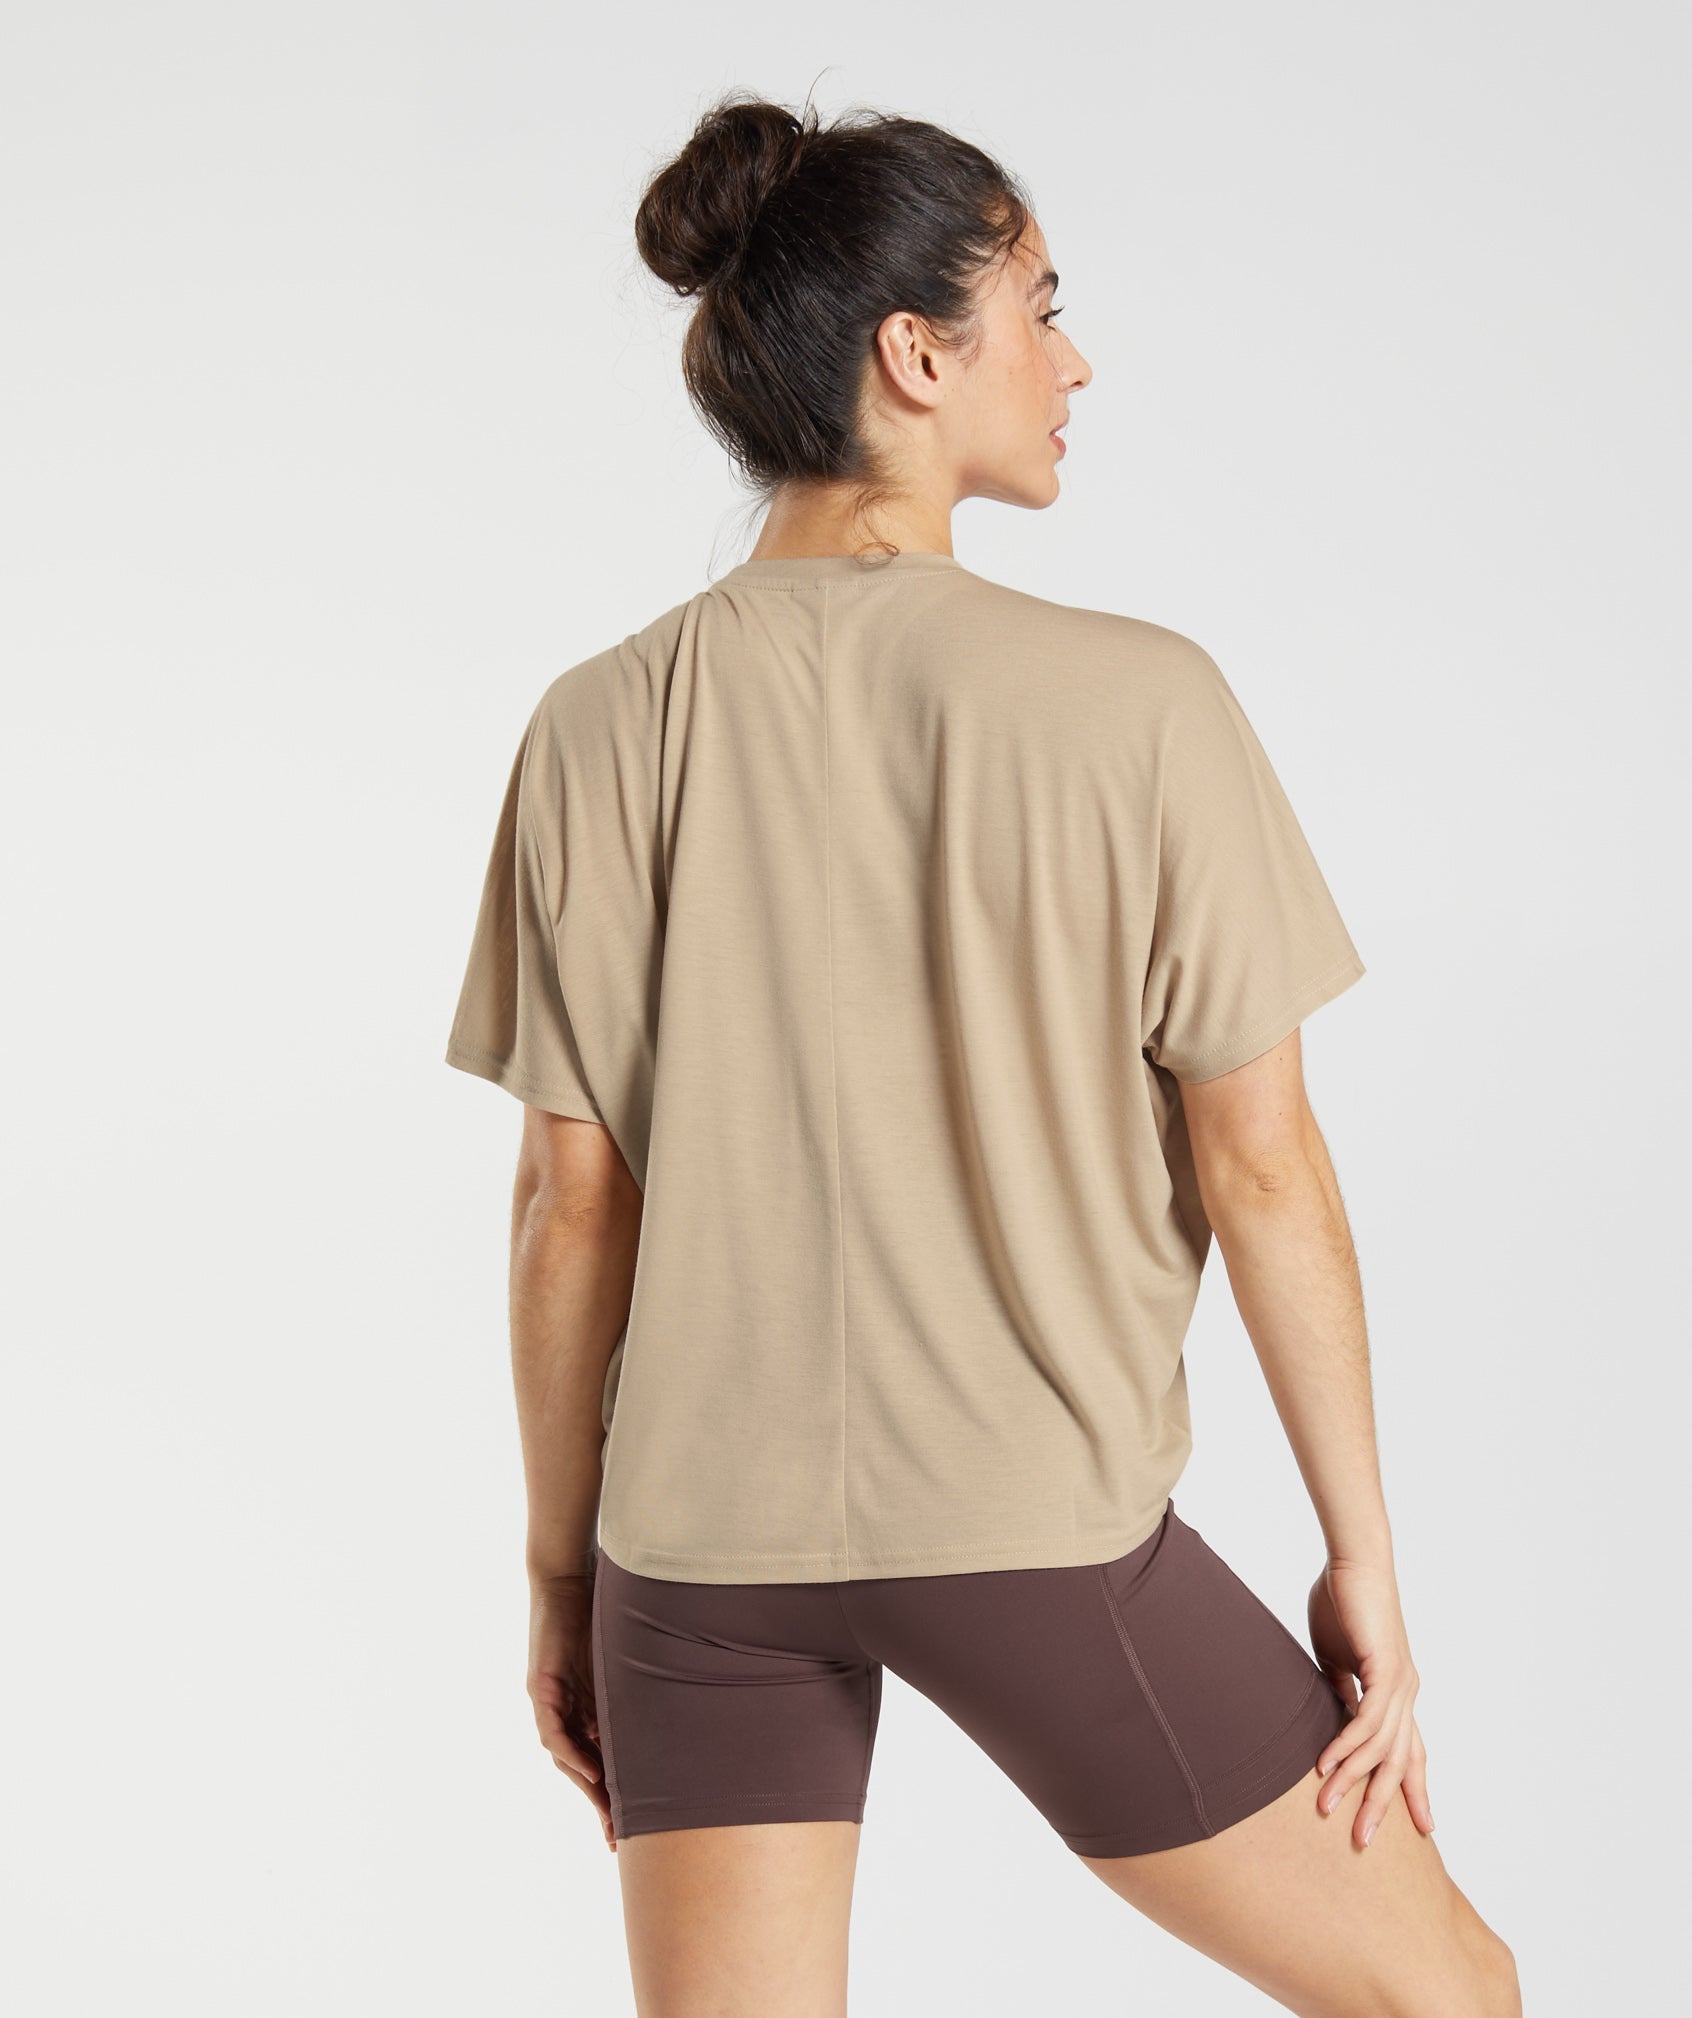 Super Soft T-Shirt in Toasted Brown